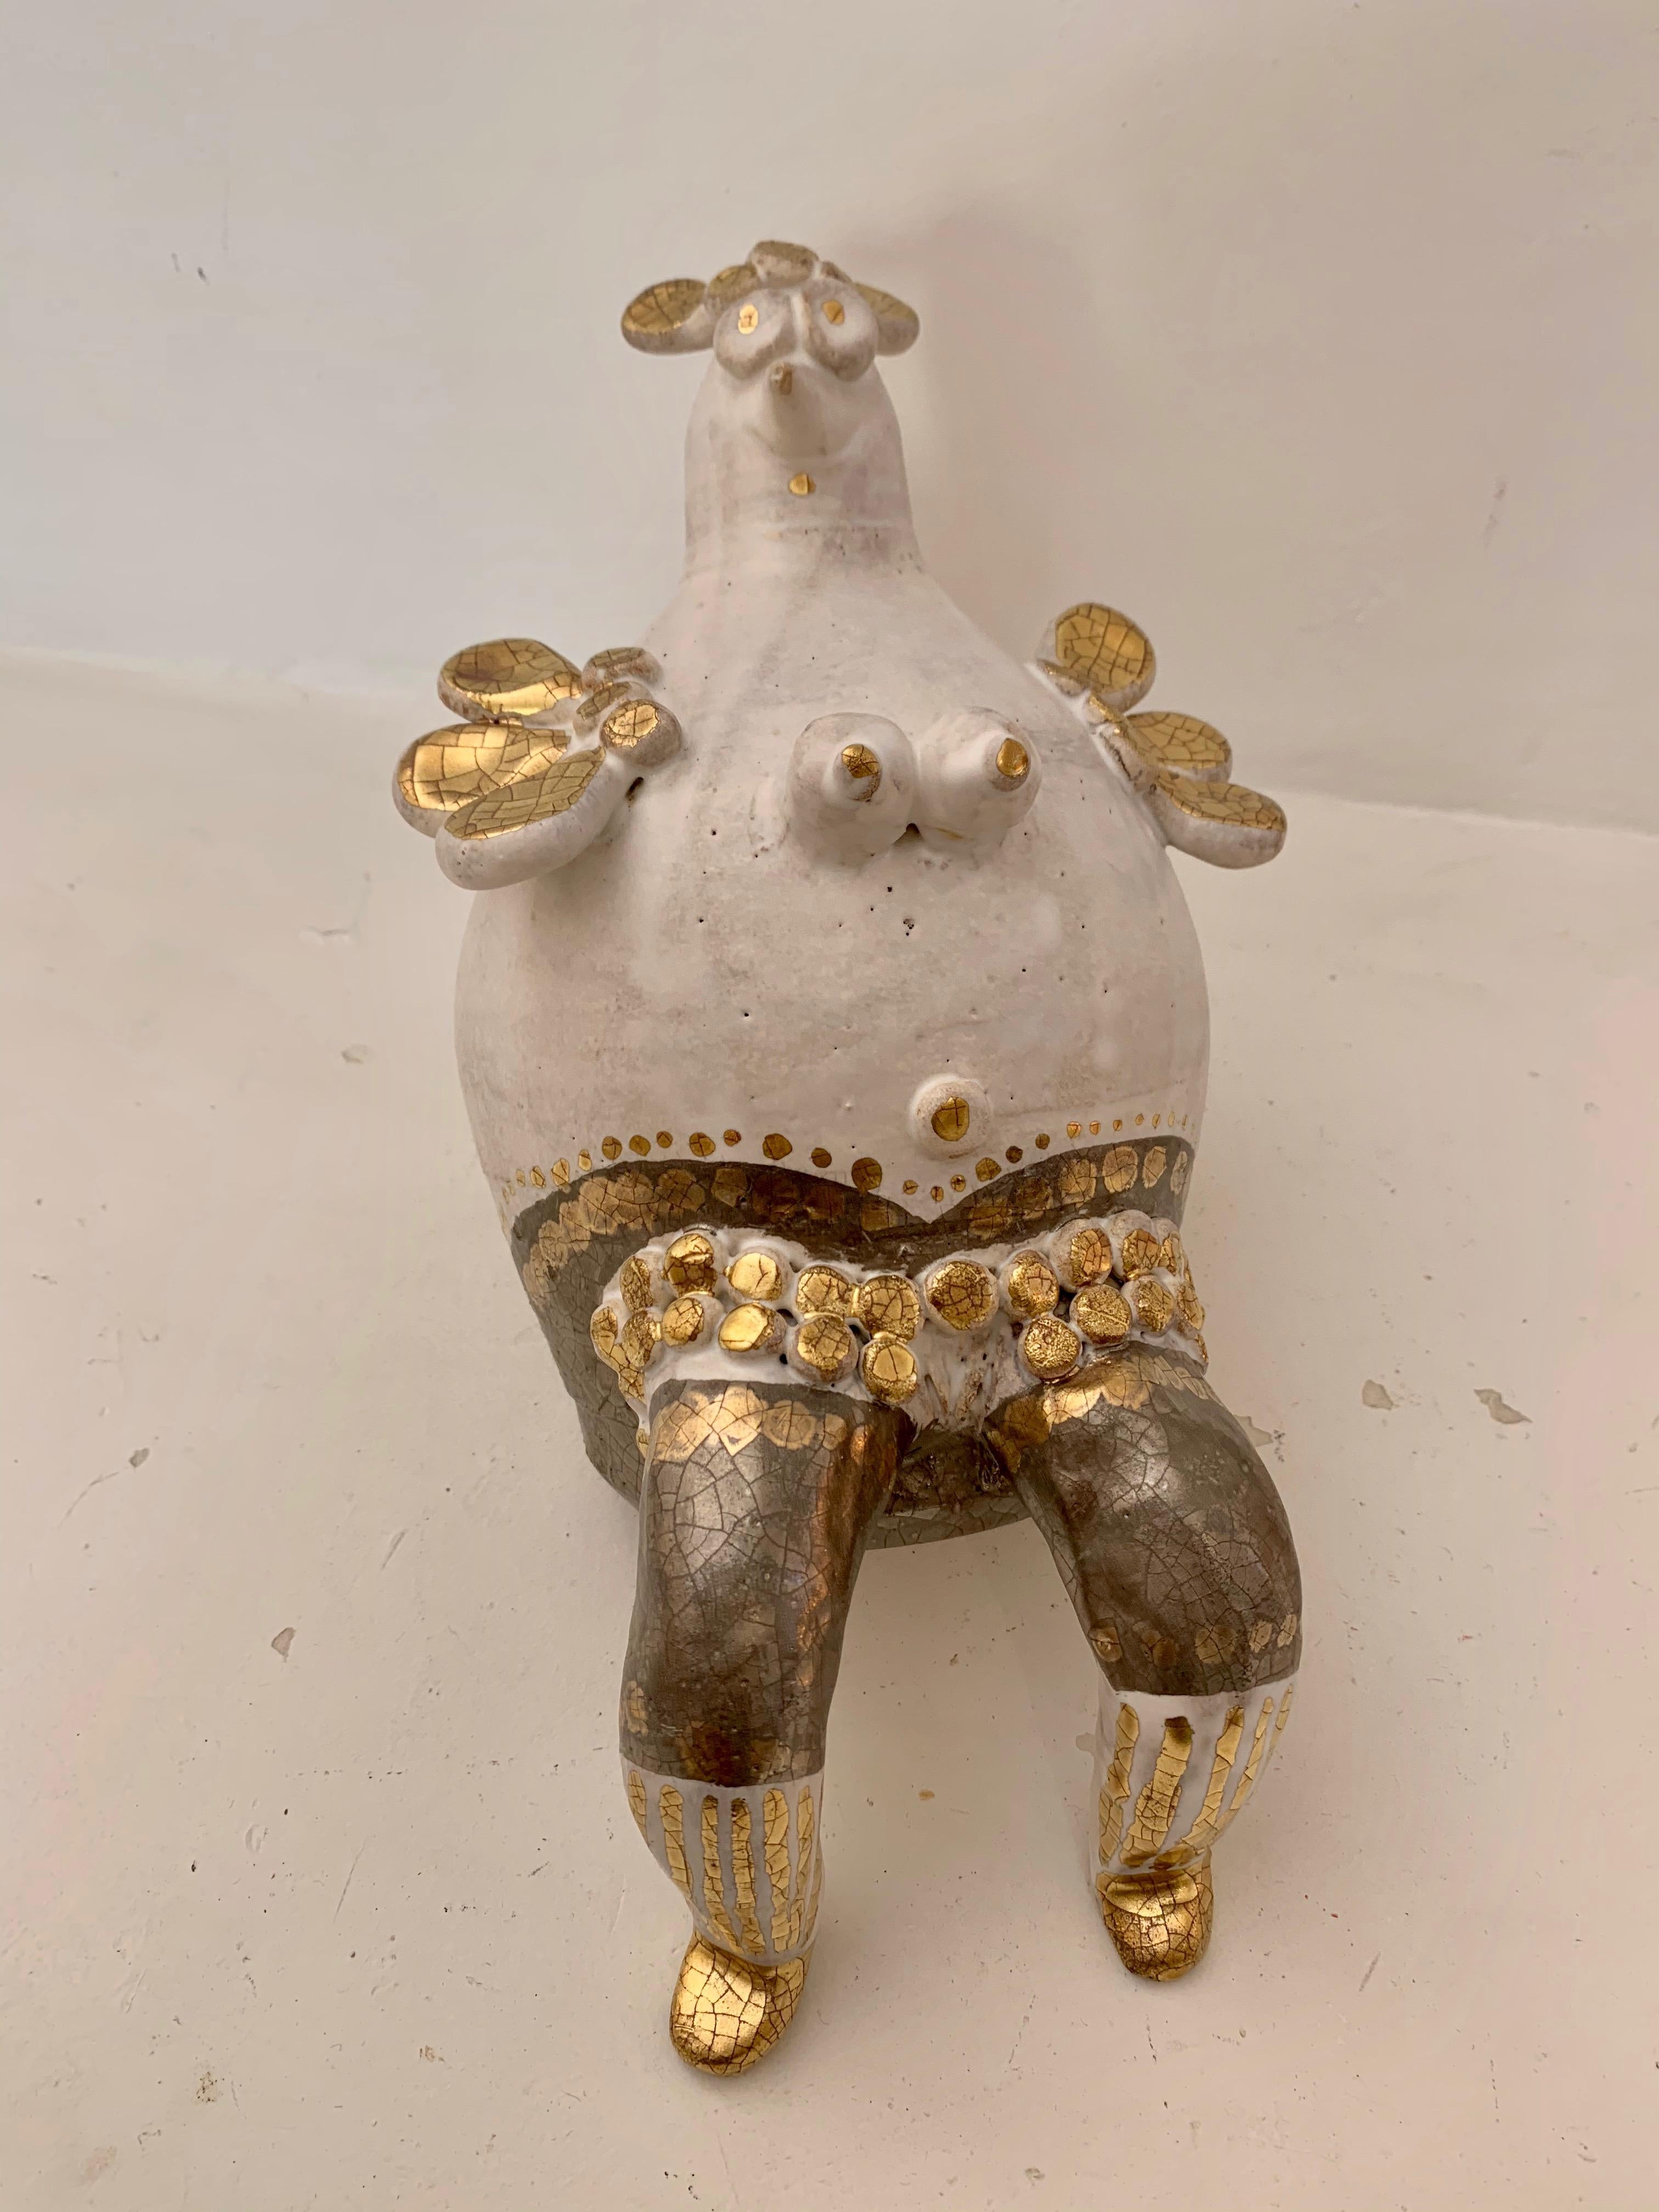 Other Georges Pelletier White, Gold and Platinum Enameled Ceramic Hen Sculpture